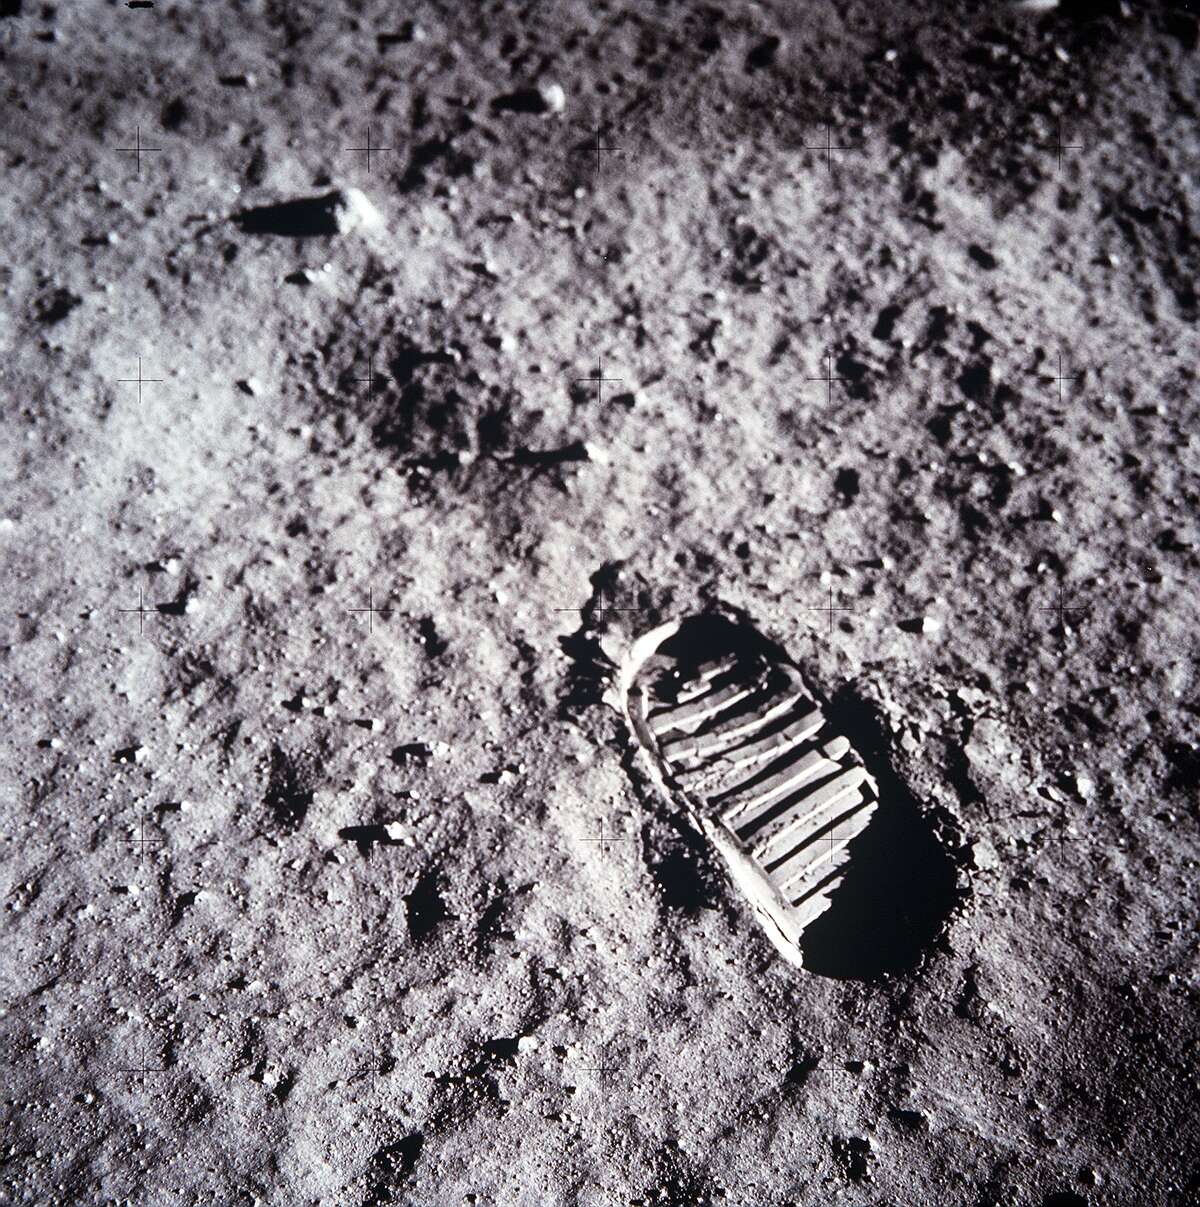 An astronaut's bootprint leaves a mark on the lunar surface July 20, 1969 on the moon. The 30th anniversary of the Apollo 11 Moon mission is celebrated July 20, 1999. (Photo by NASA/Newsmakers)